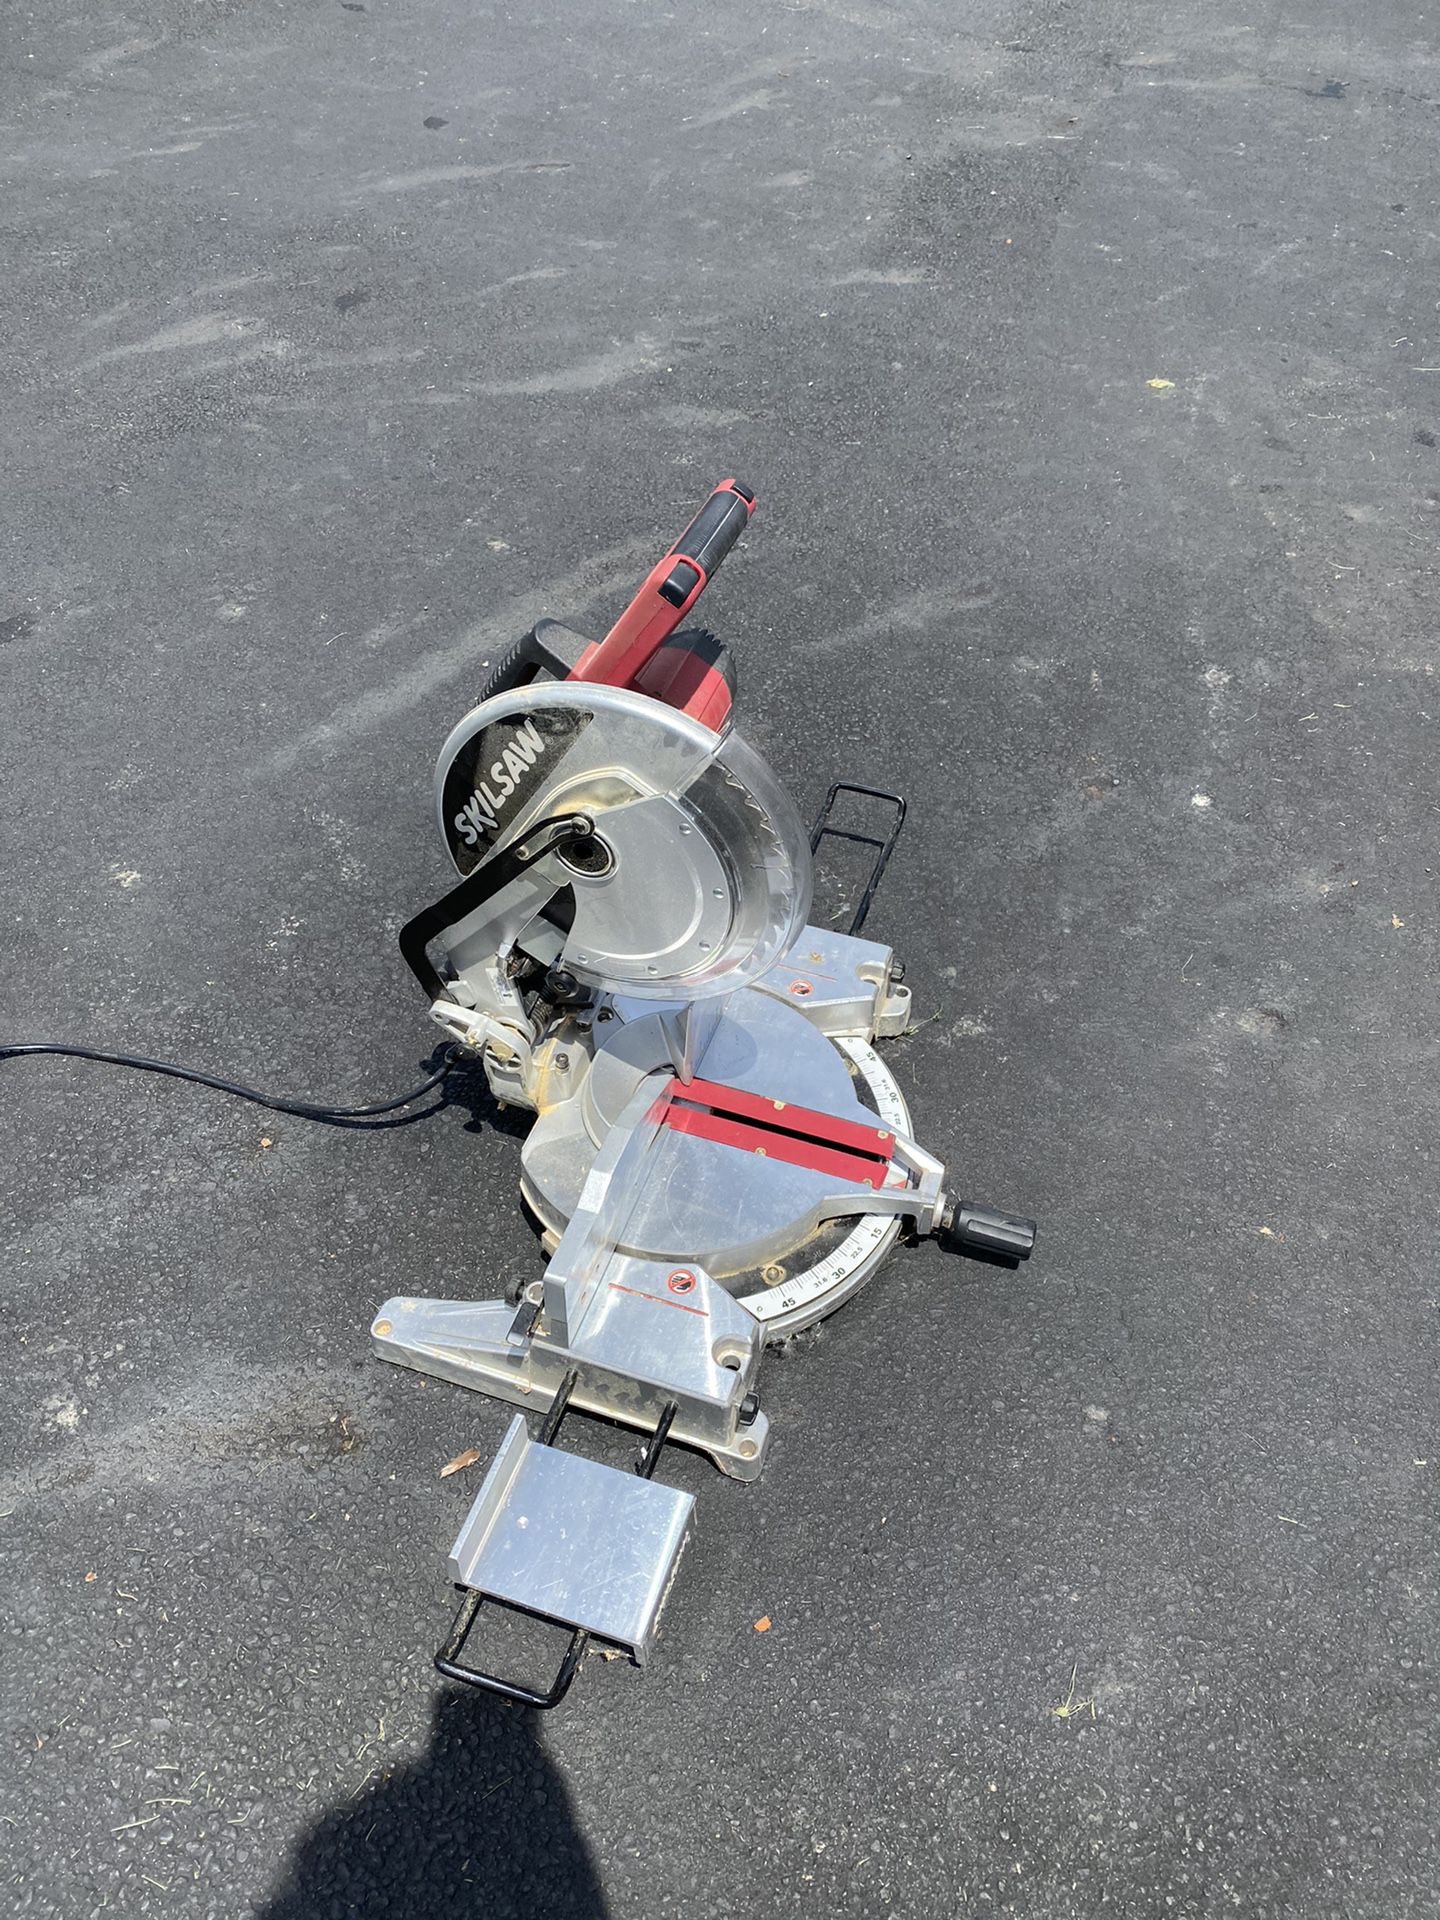 12” skill miter saw. With laser/ good blade